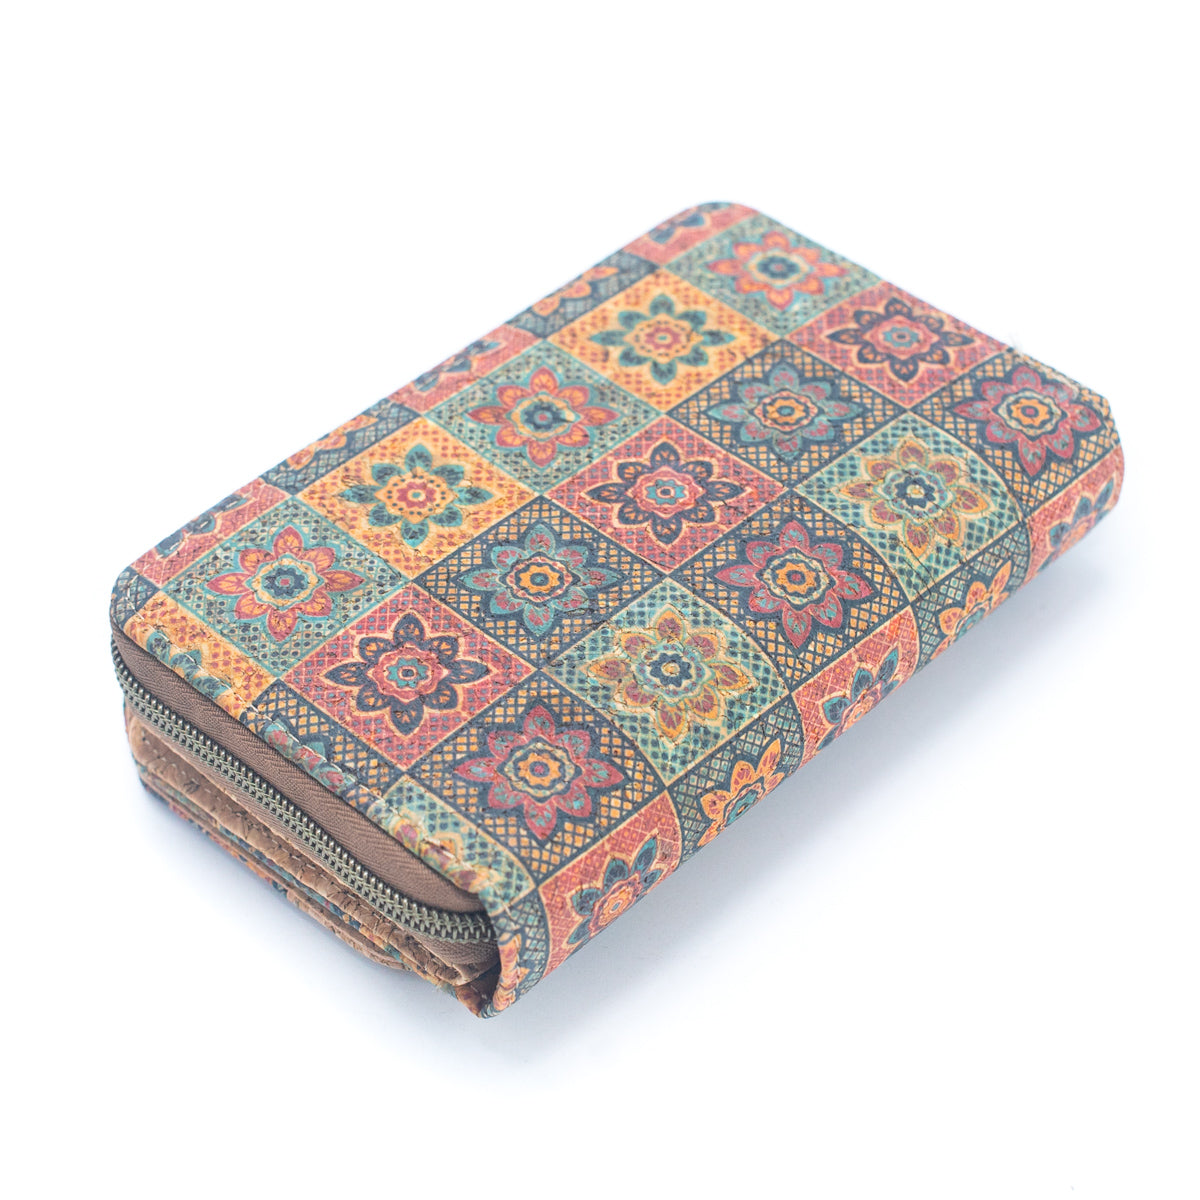 Patterned Natural Cork Women's Vegan Wallet | THE CORK COLLECTION